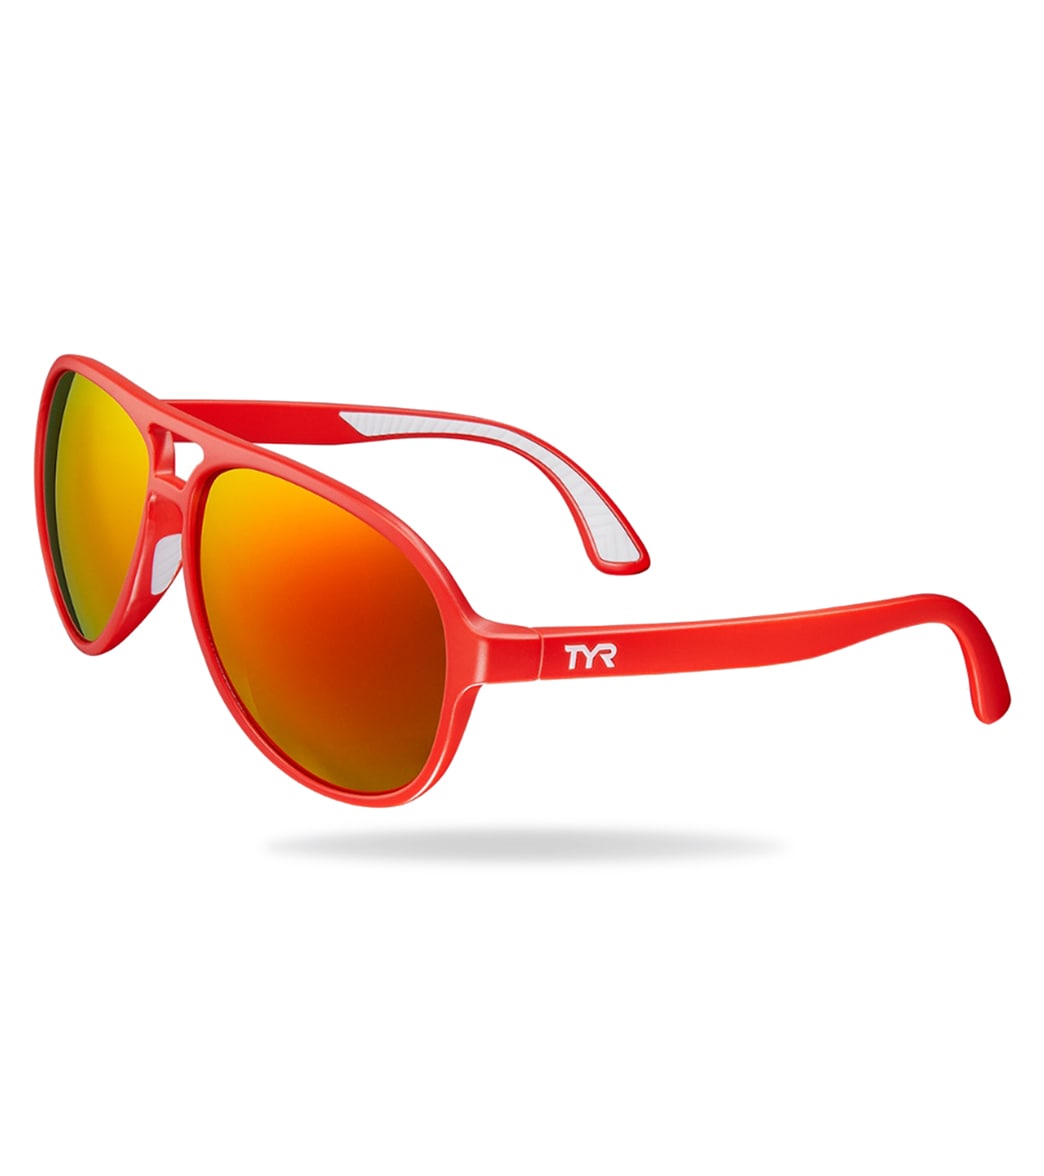 TYR Men's Goldenwest Aviator Large Sunglasses - Red - Swimoutlet.com